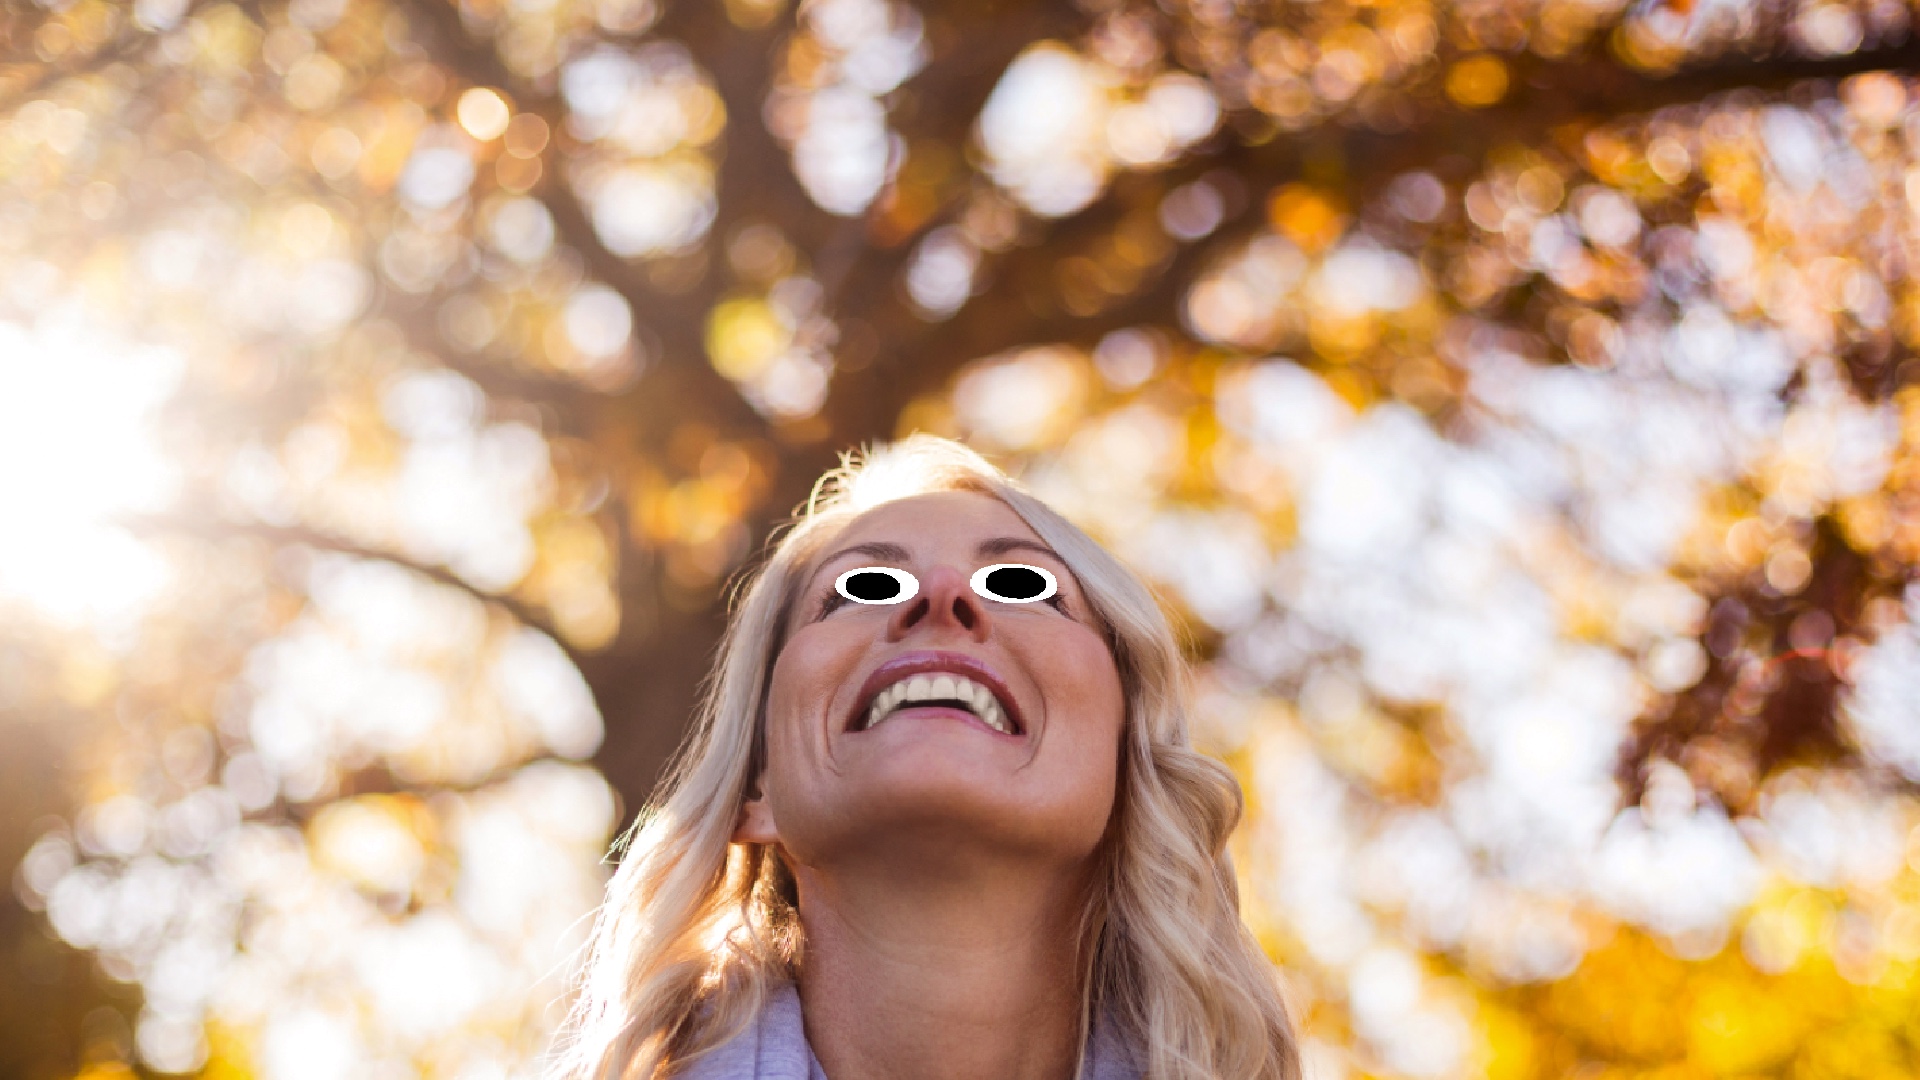 A woman stares up towards the sky, with autumnal trees in the background